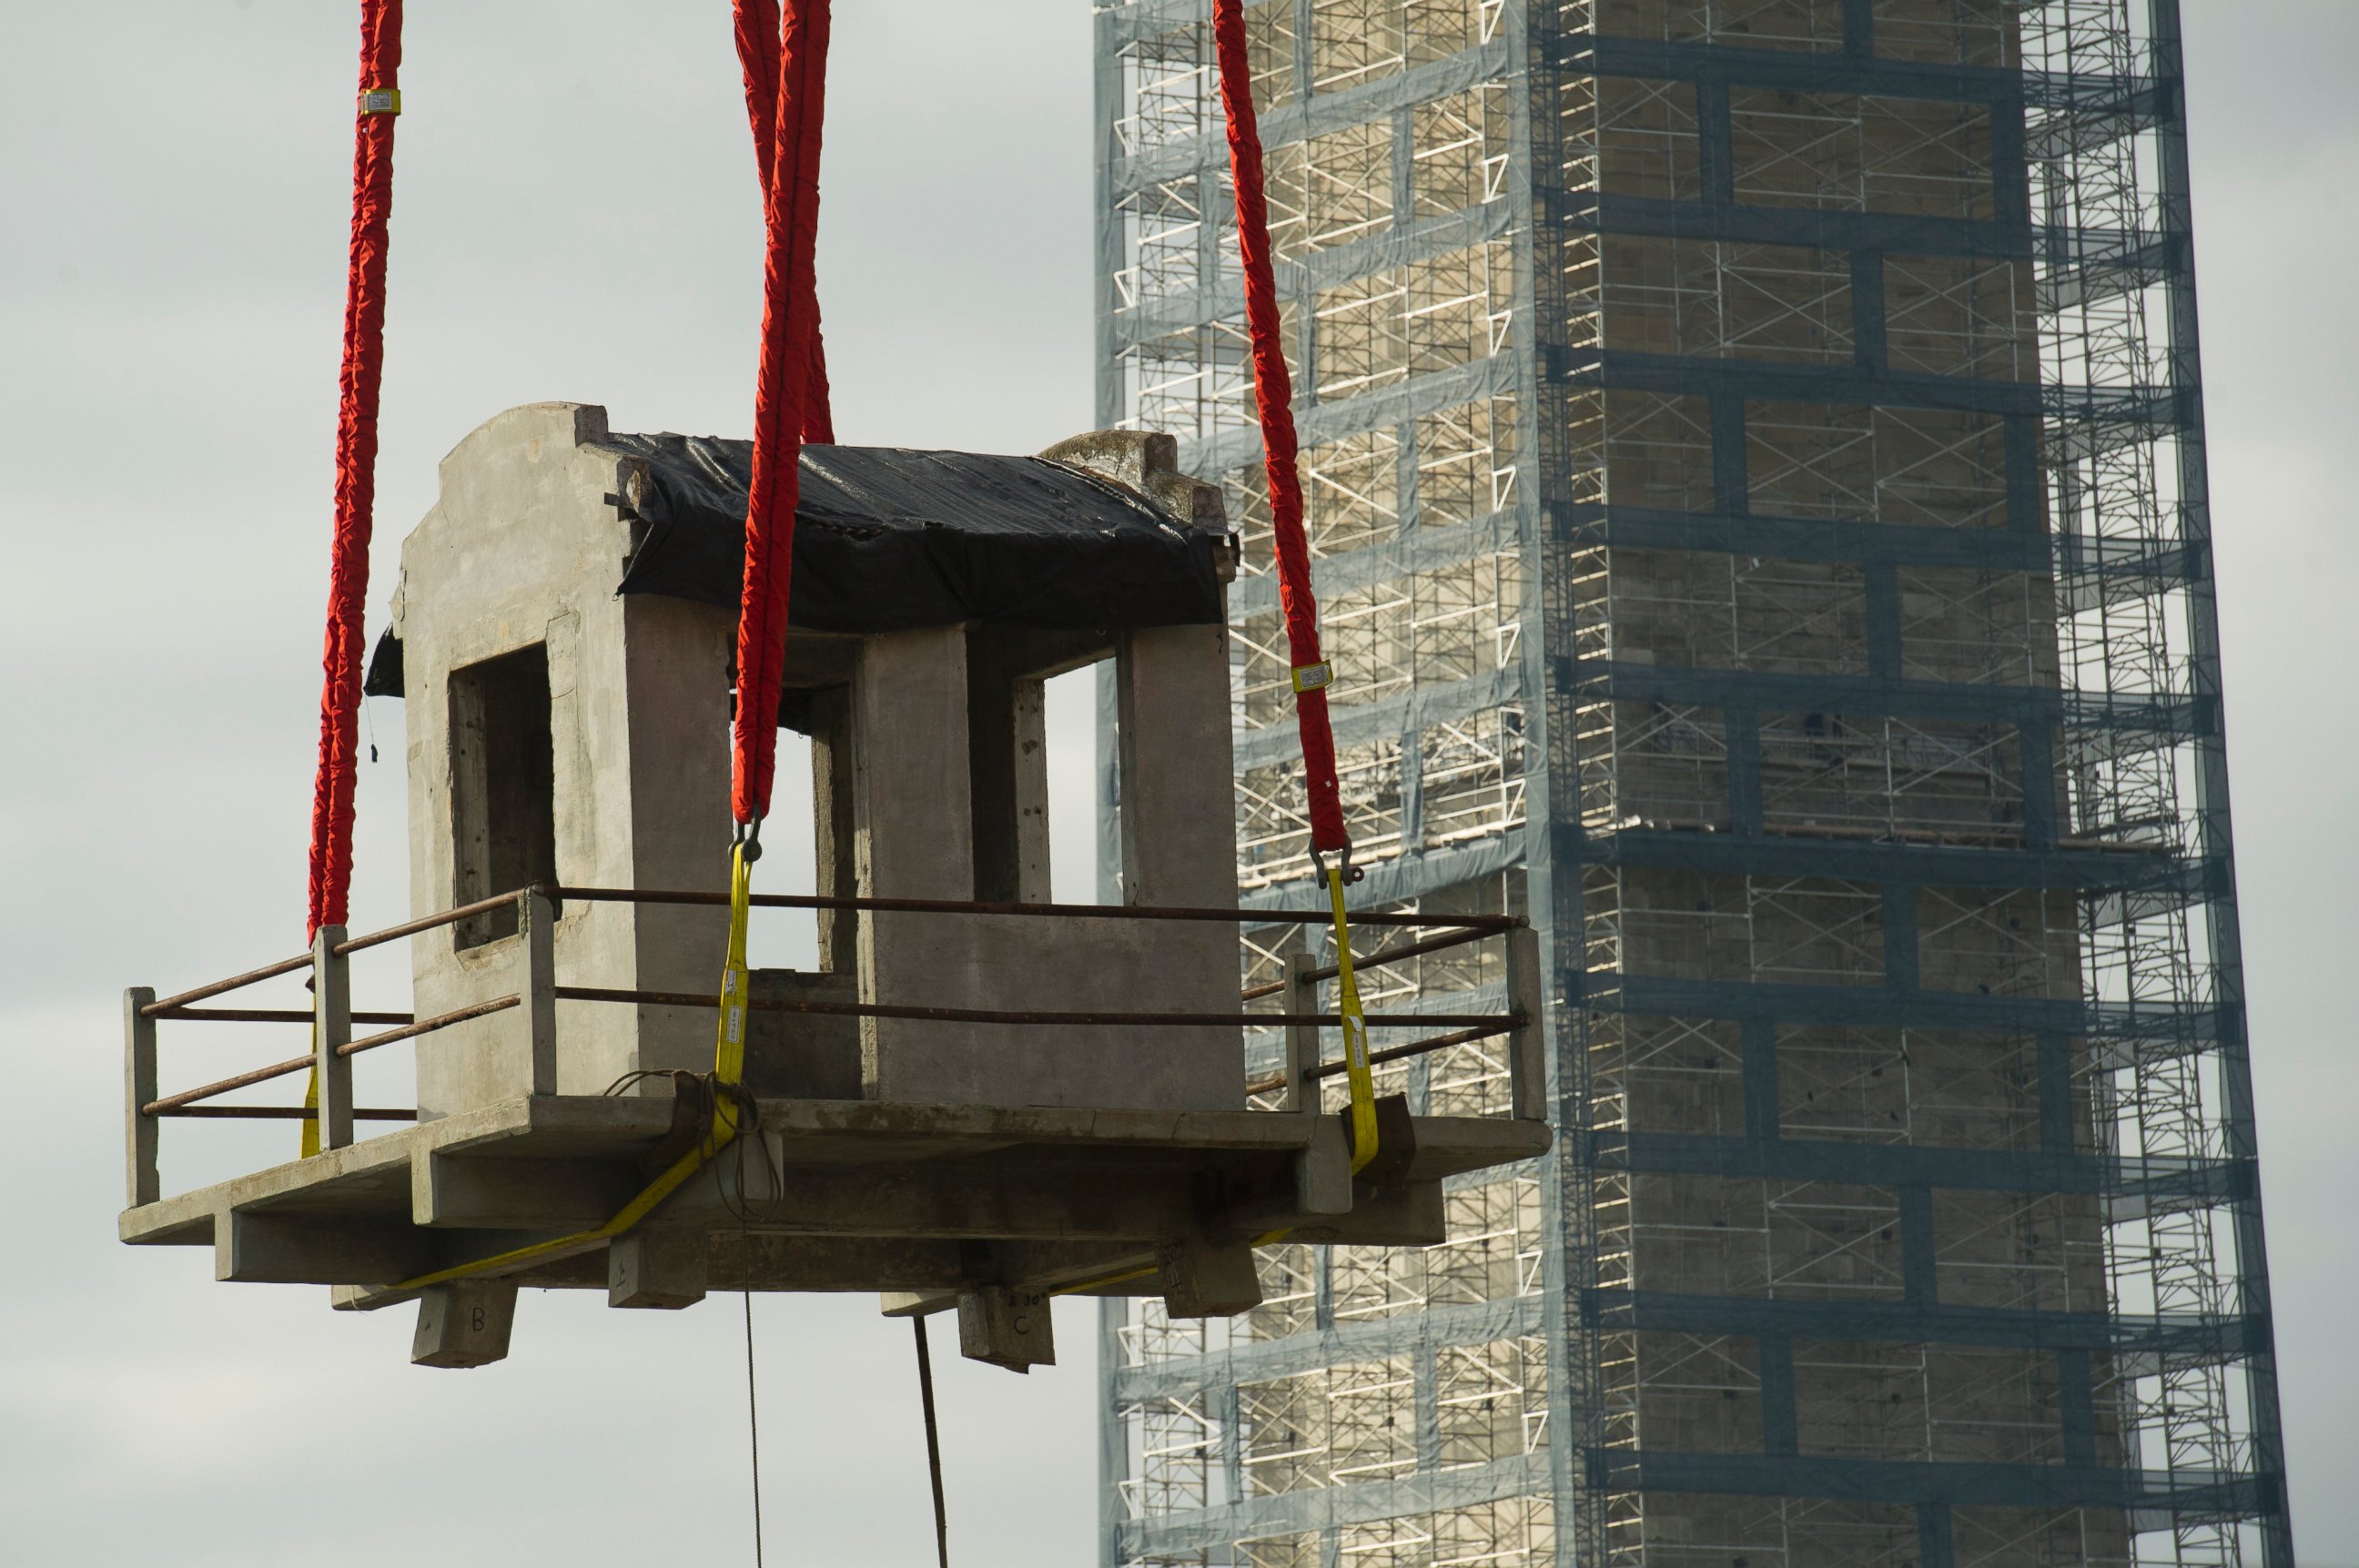 PHOTO: A guard tower from Louisiana State Penitentiary, also known as "Angola" and "The Farm" is lowered into the construction site of The National Museum of African American History and Culture in Washington, Nov. 17, 2013.